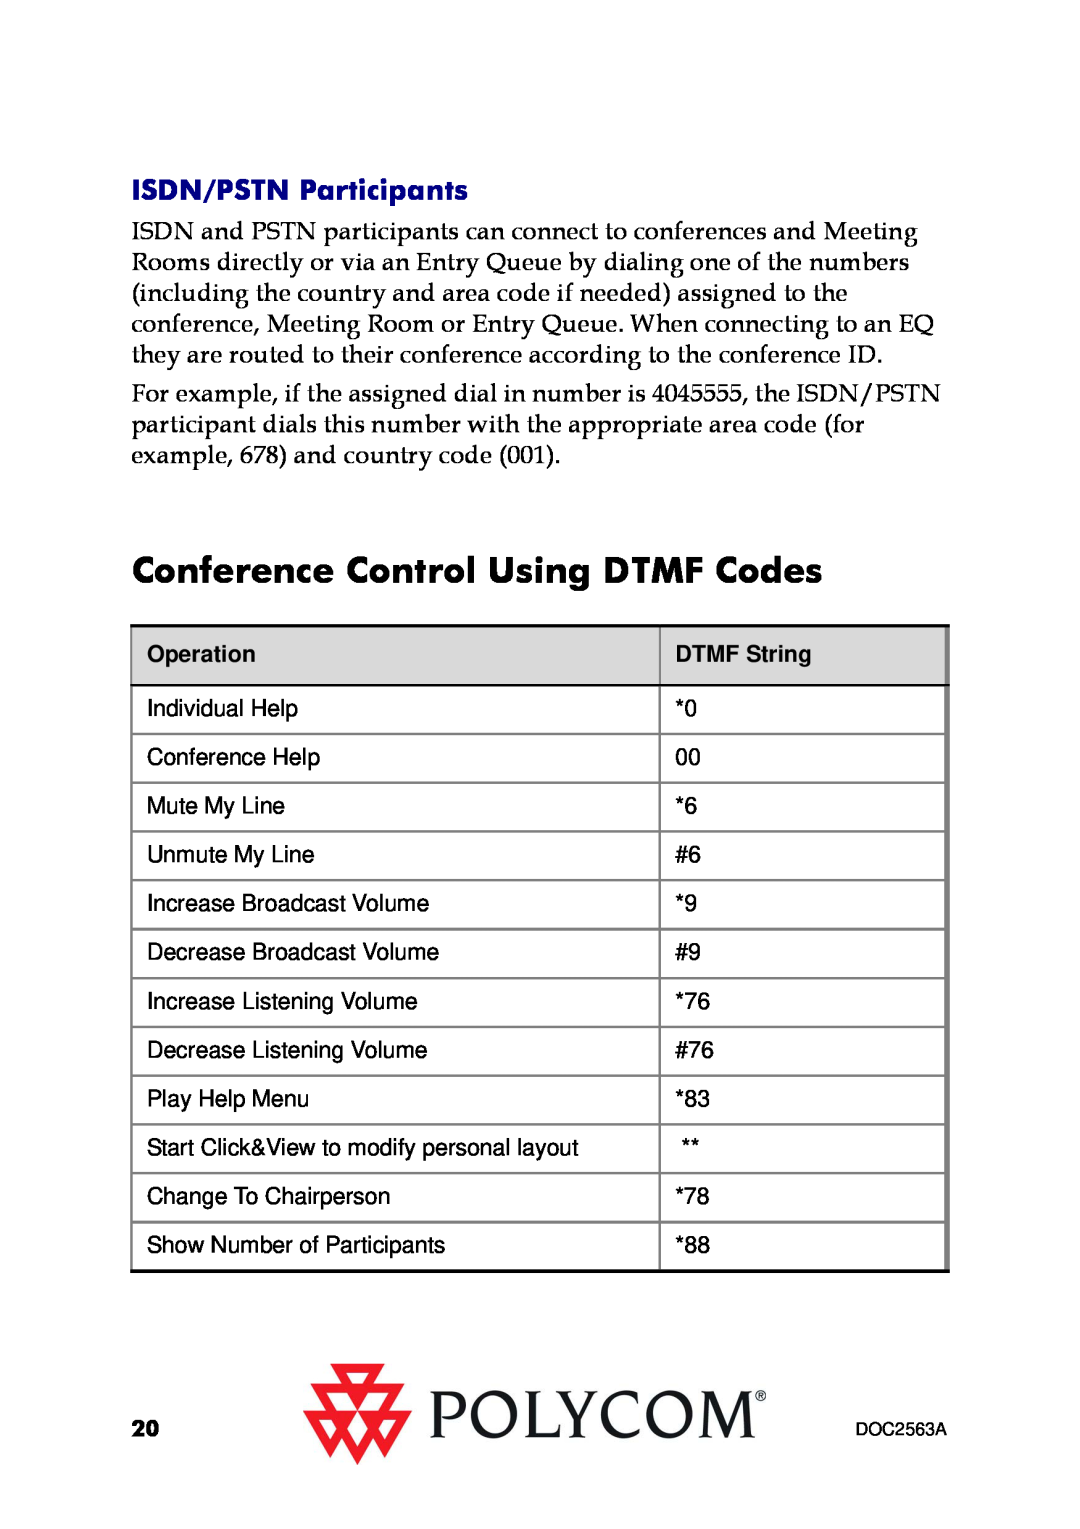 Polycom DOC2563A manual Conference Control Using DTMF Codes, ISDN/PSTN Participants 